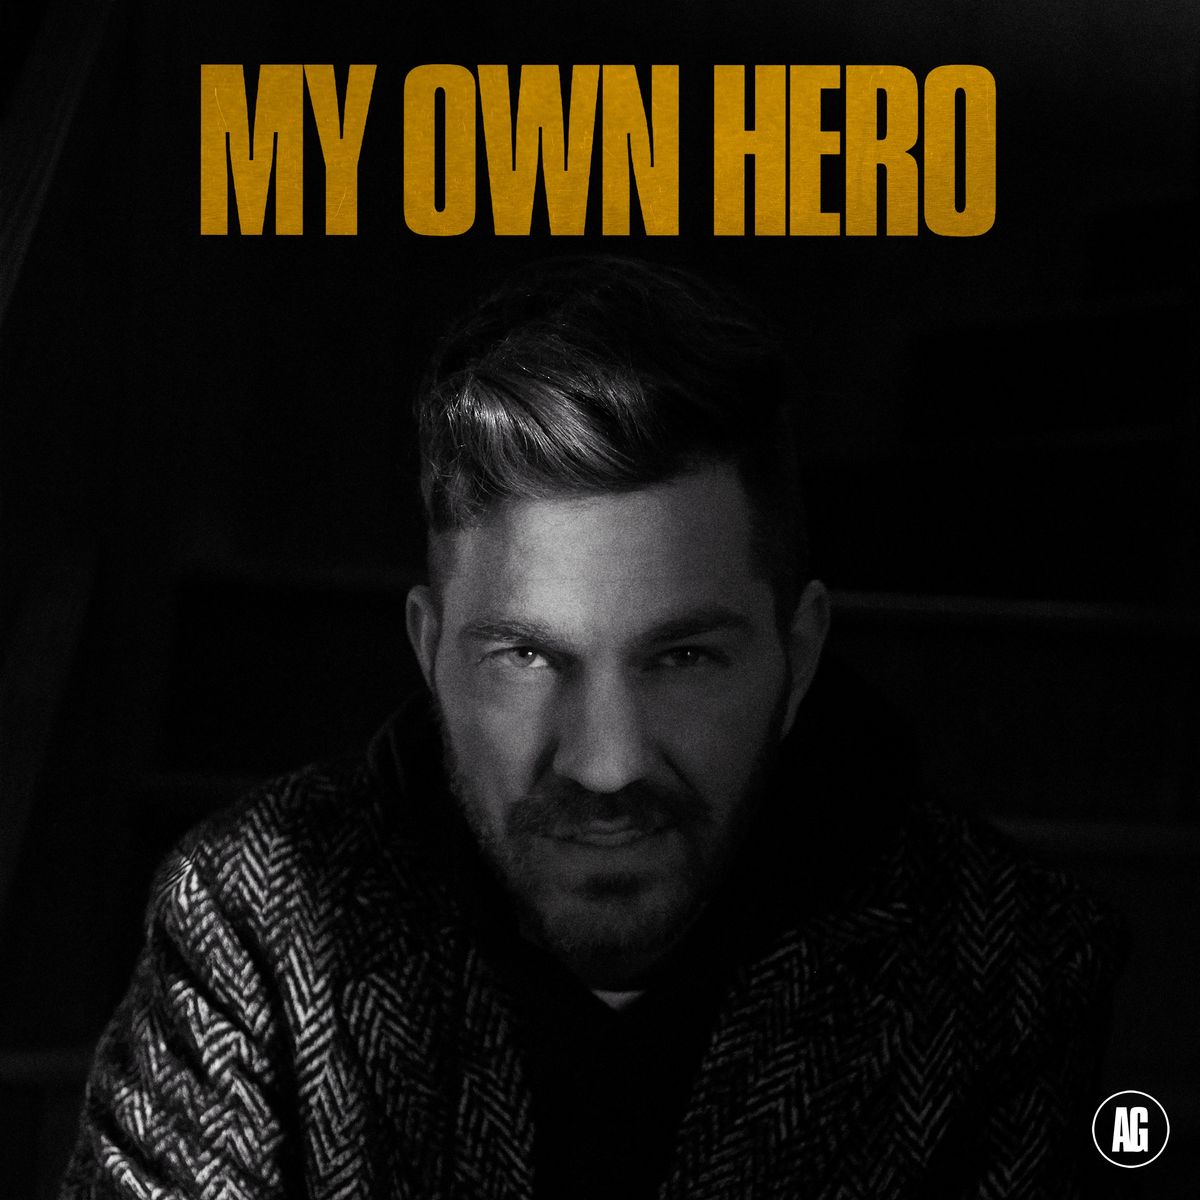 Andy Grammer My Own Hero Swisscharts Com Set me up for the falling, gave me no warning you were gone let me down i was writer: andy grammer my own hero